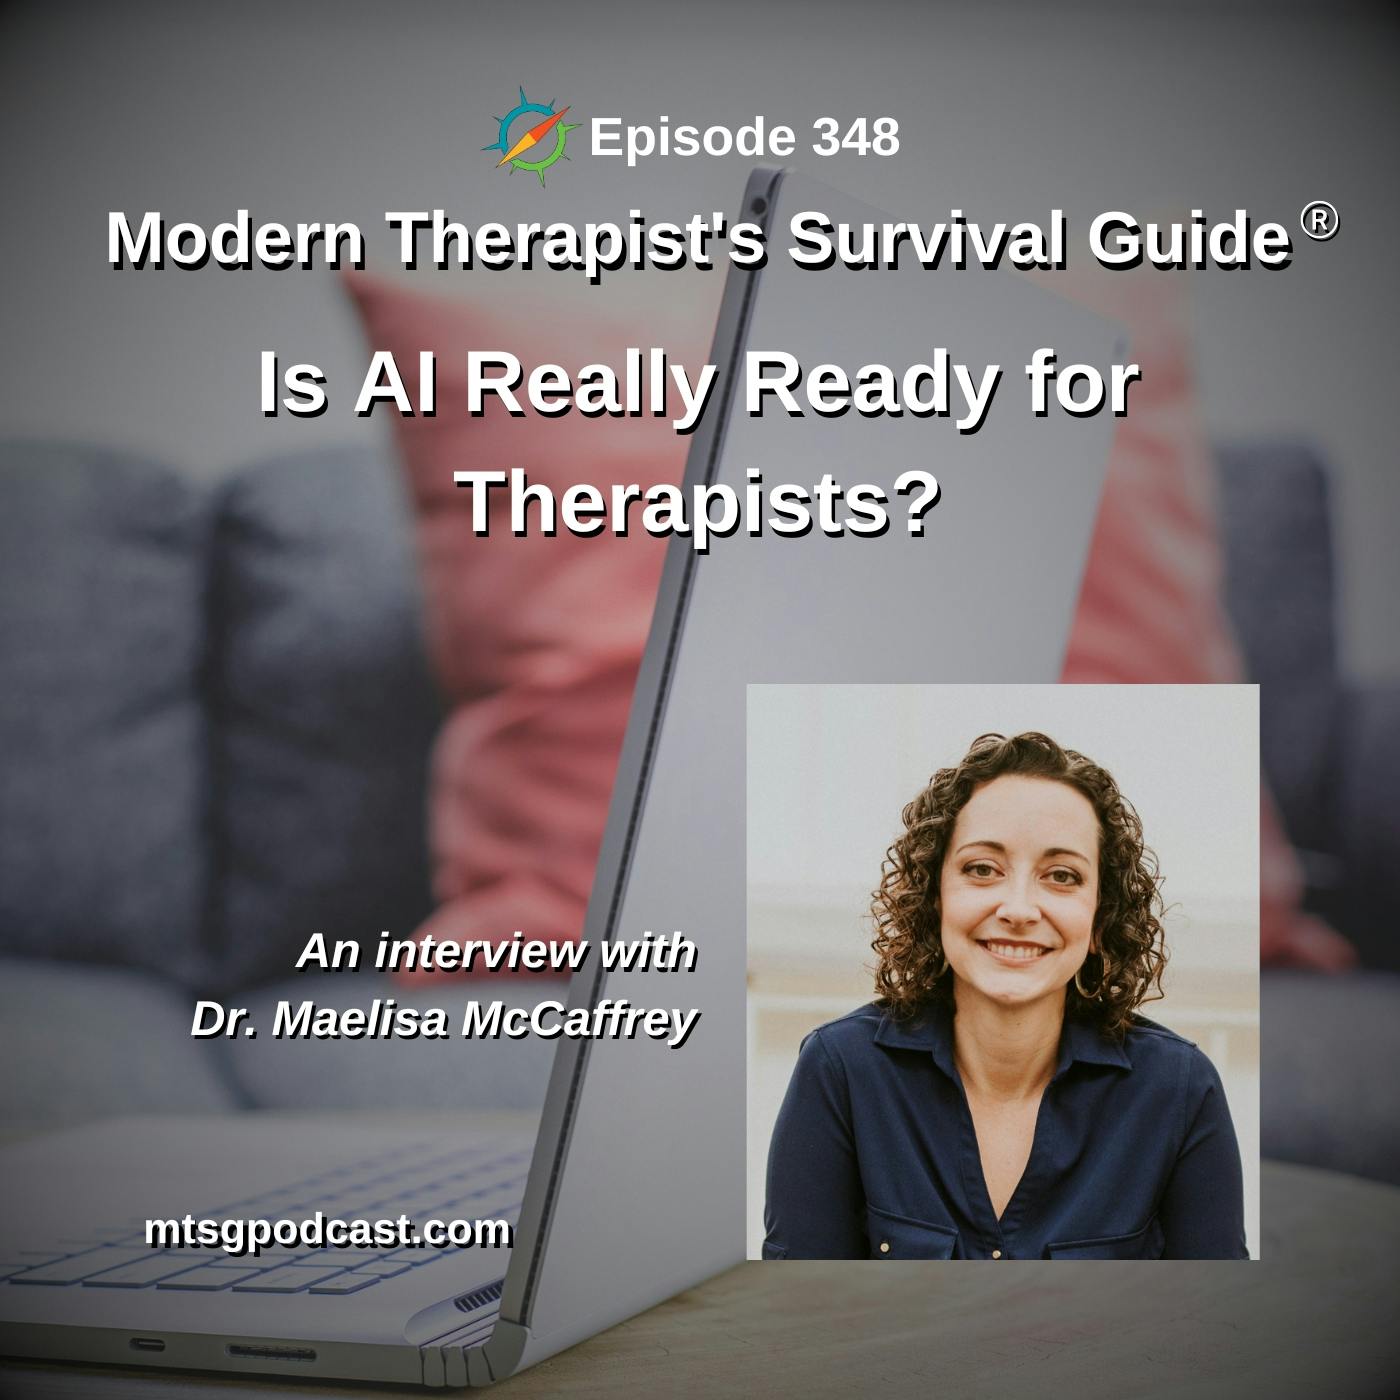 Is AI Really Ready for Therapists? An interview with Dr. Maelisa McCaffrey